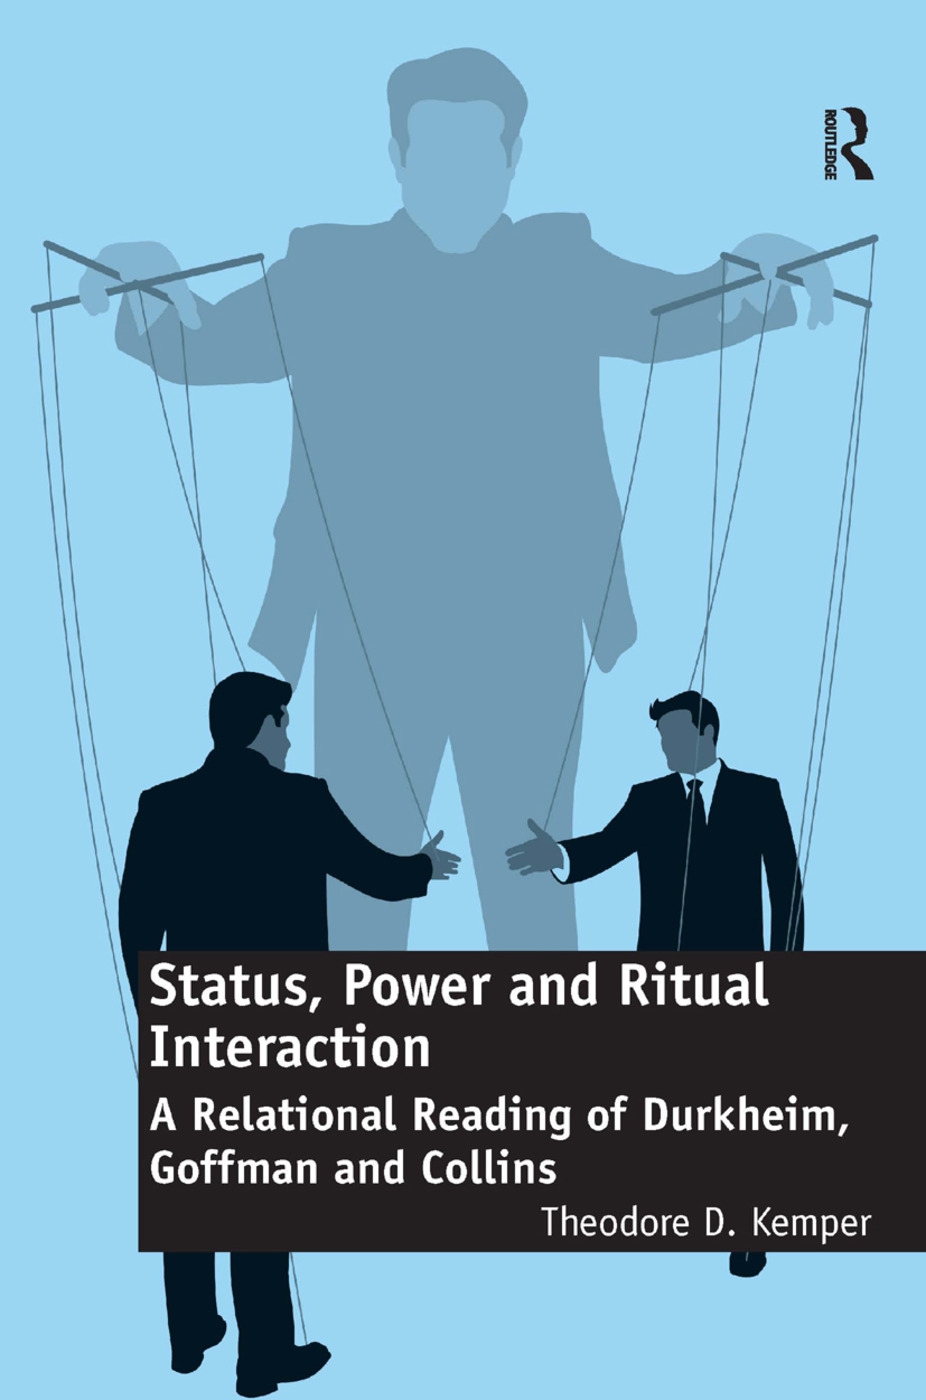 Status, Power and Ritual Interaction: A Relational Reading of Durkheim, Goffman and Collins